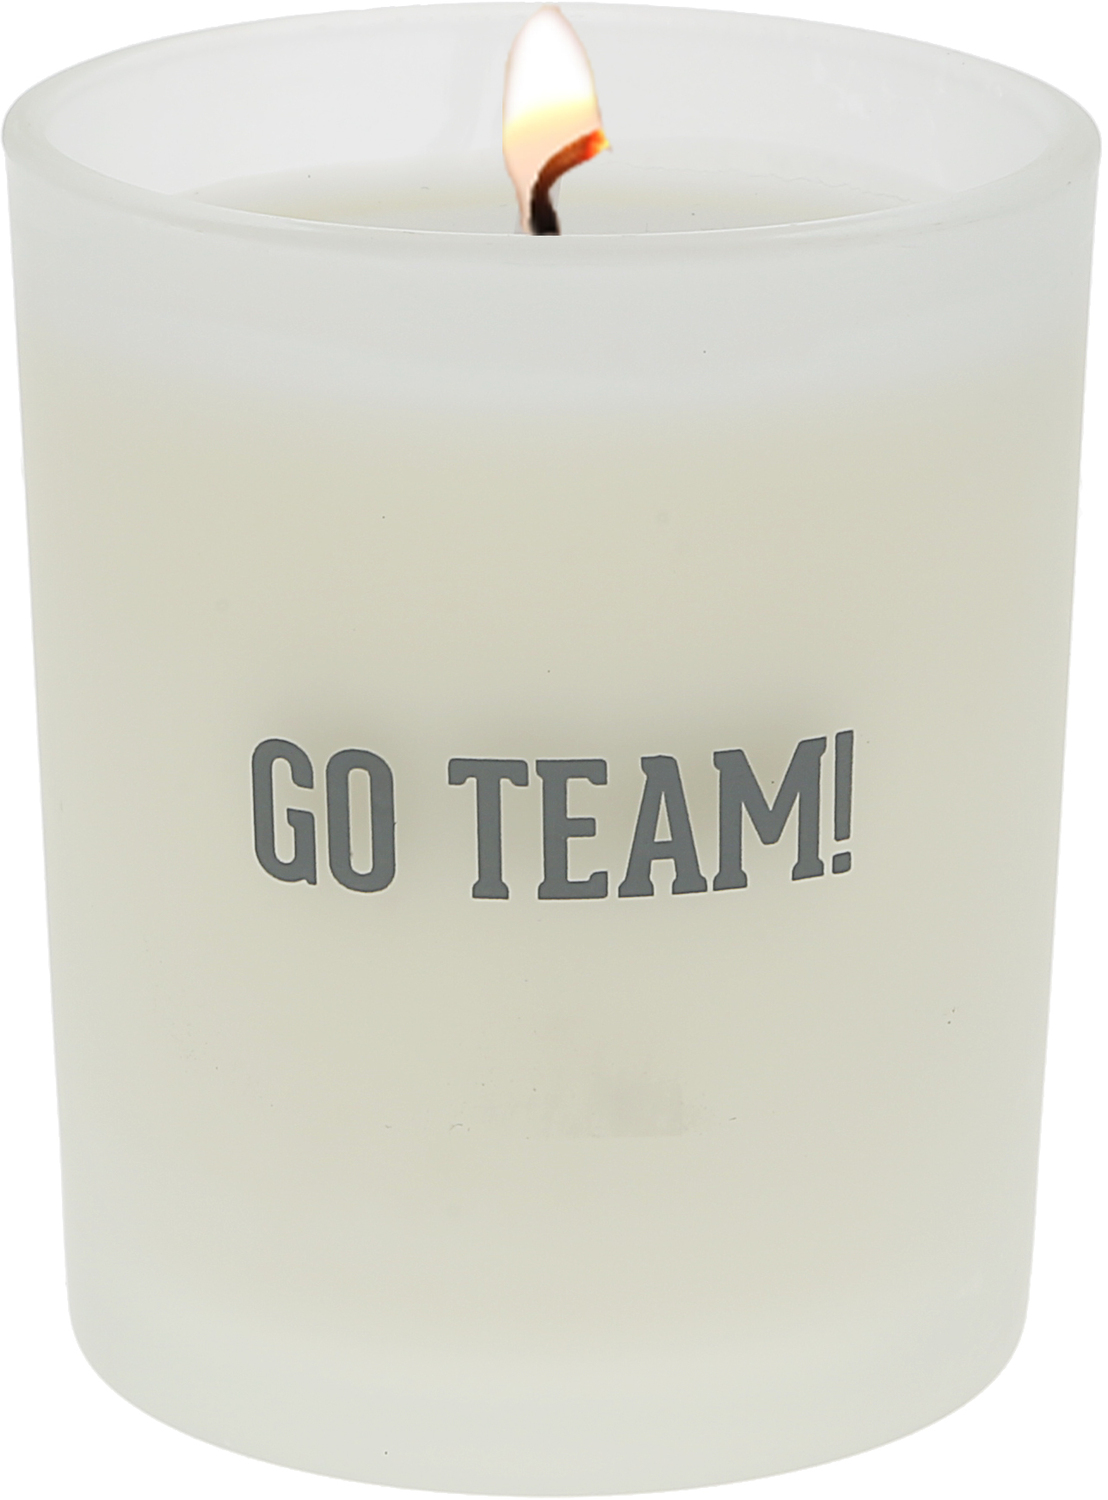 Go Team! by Repre-Scent - Go Team! - 5.5 oz - 100% Soy Wax Candle Scent: Tranquility